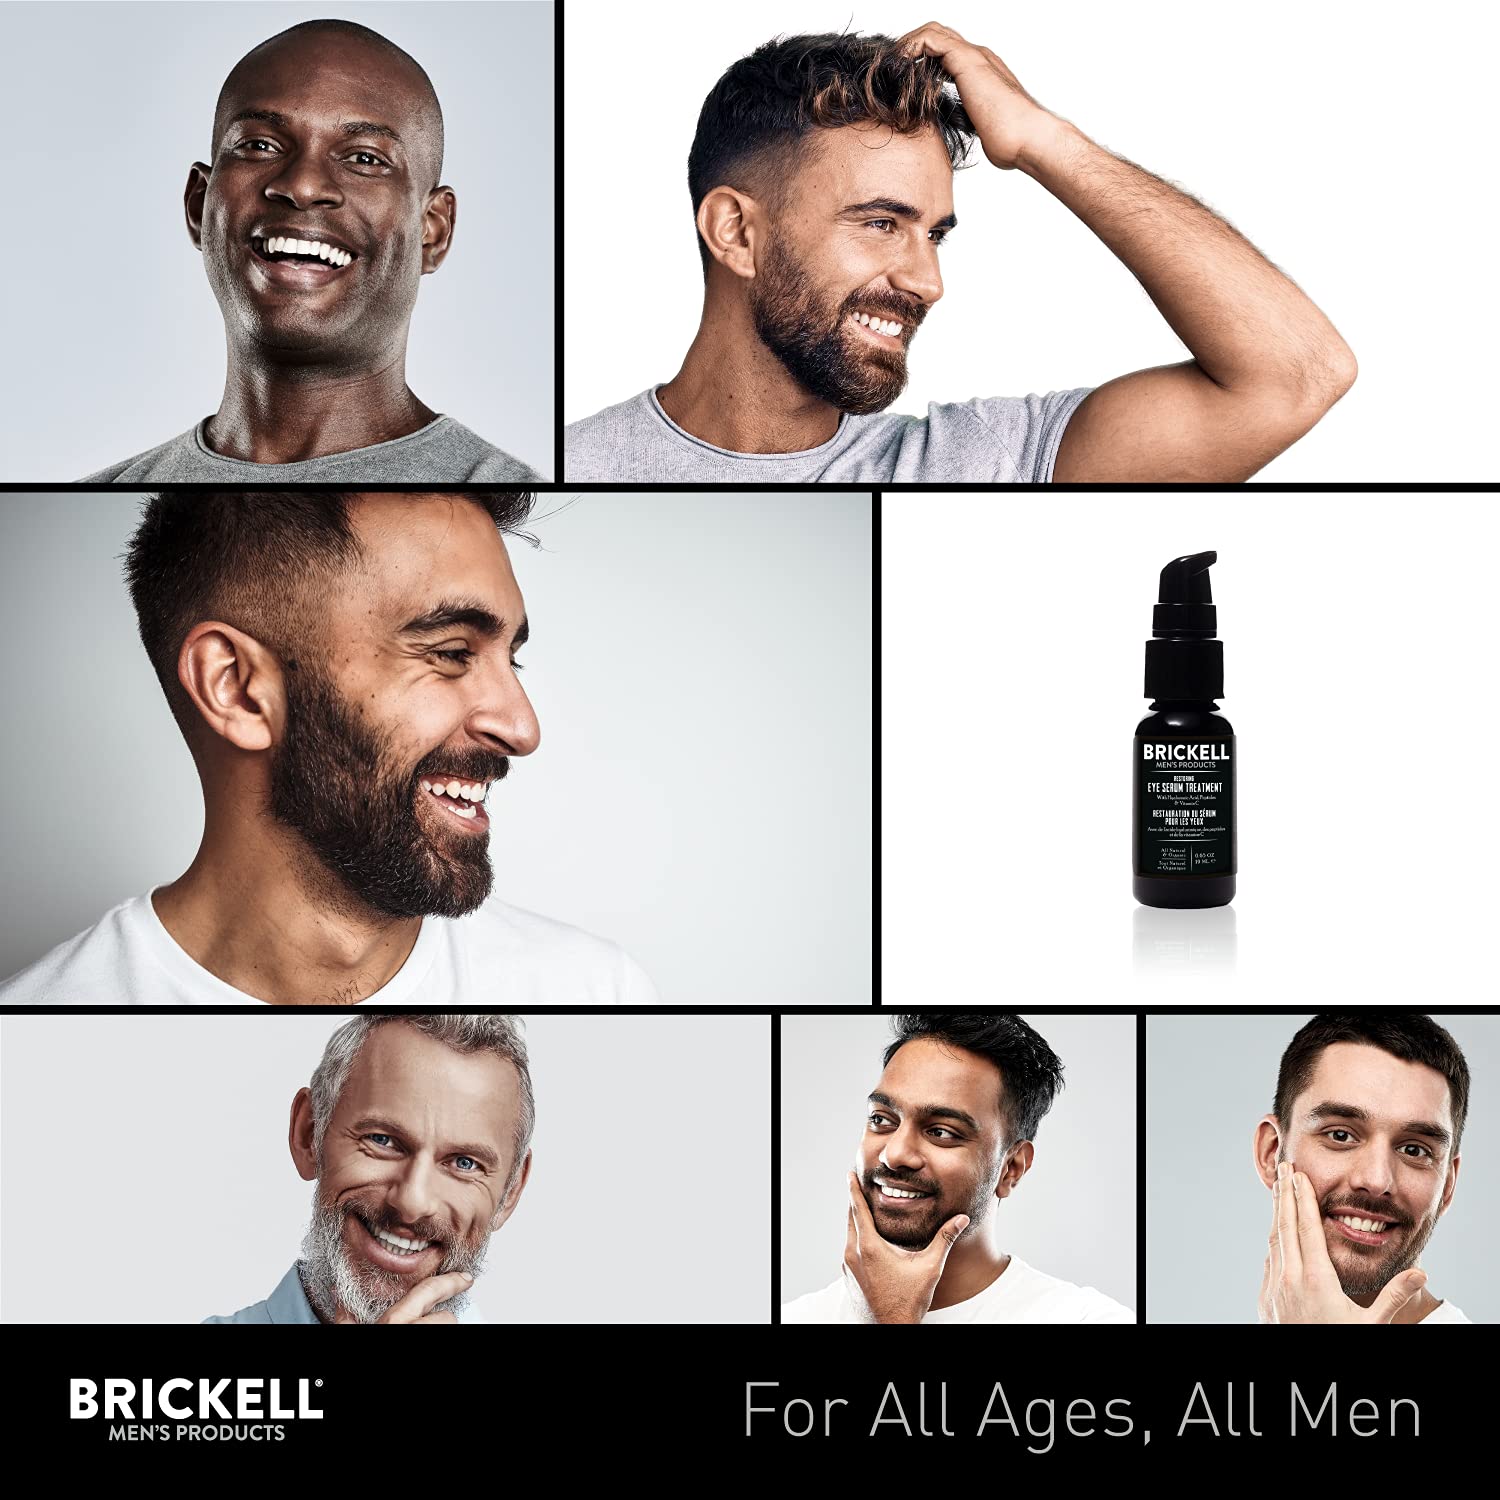 Brickell Men's Dark Circle Under Eye Treatment Serum For Men, Natural and Organic Eye Gel to Firm Men's Wrinkles, Reduce Dark Bags Under Eyes, and Promote Youthful Skin, 0.65 Ounce, Unscented : Beauty & Personal Care